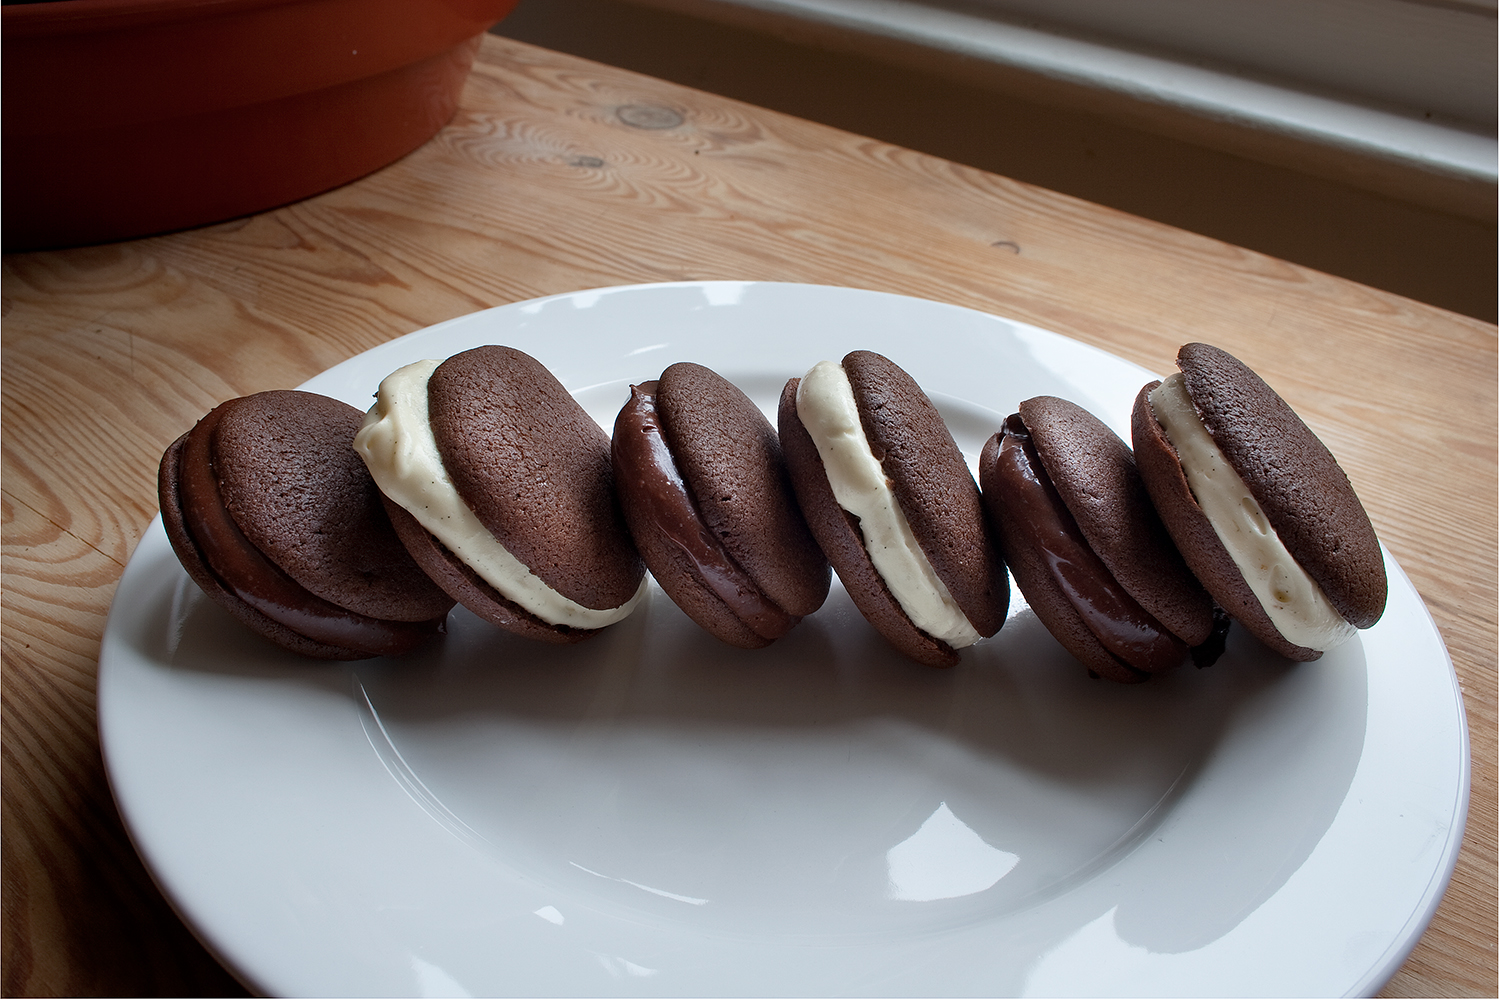 Recipe: Have You Tried Whoopie Pies?